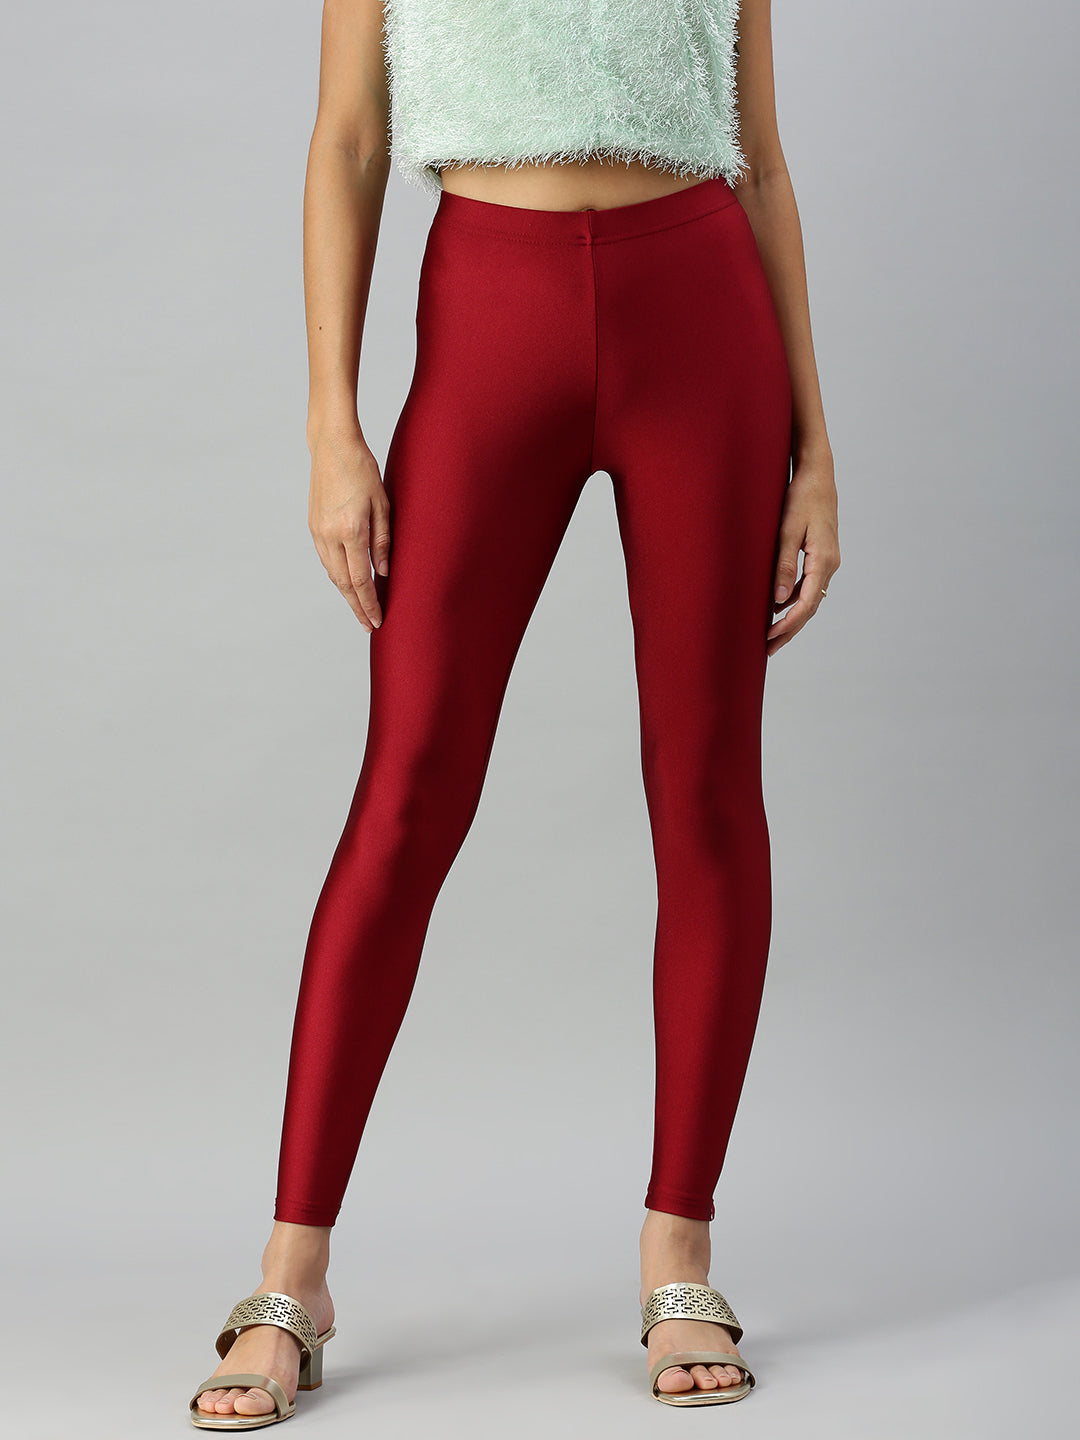 BrandPrisma - Stay stylish and sexy wearing Prisma's readymade tight-fit  shimmer #leggings that is made from high quality nylon stretch fabric. You  can wear this #stylish casual outfit for partying and outing